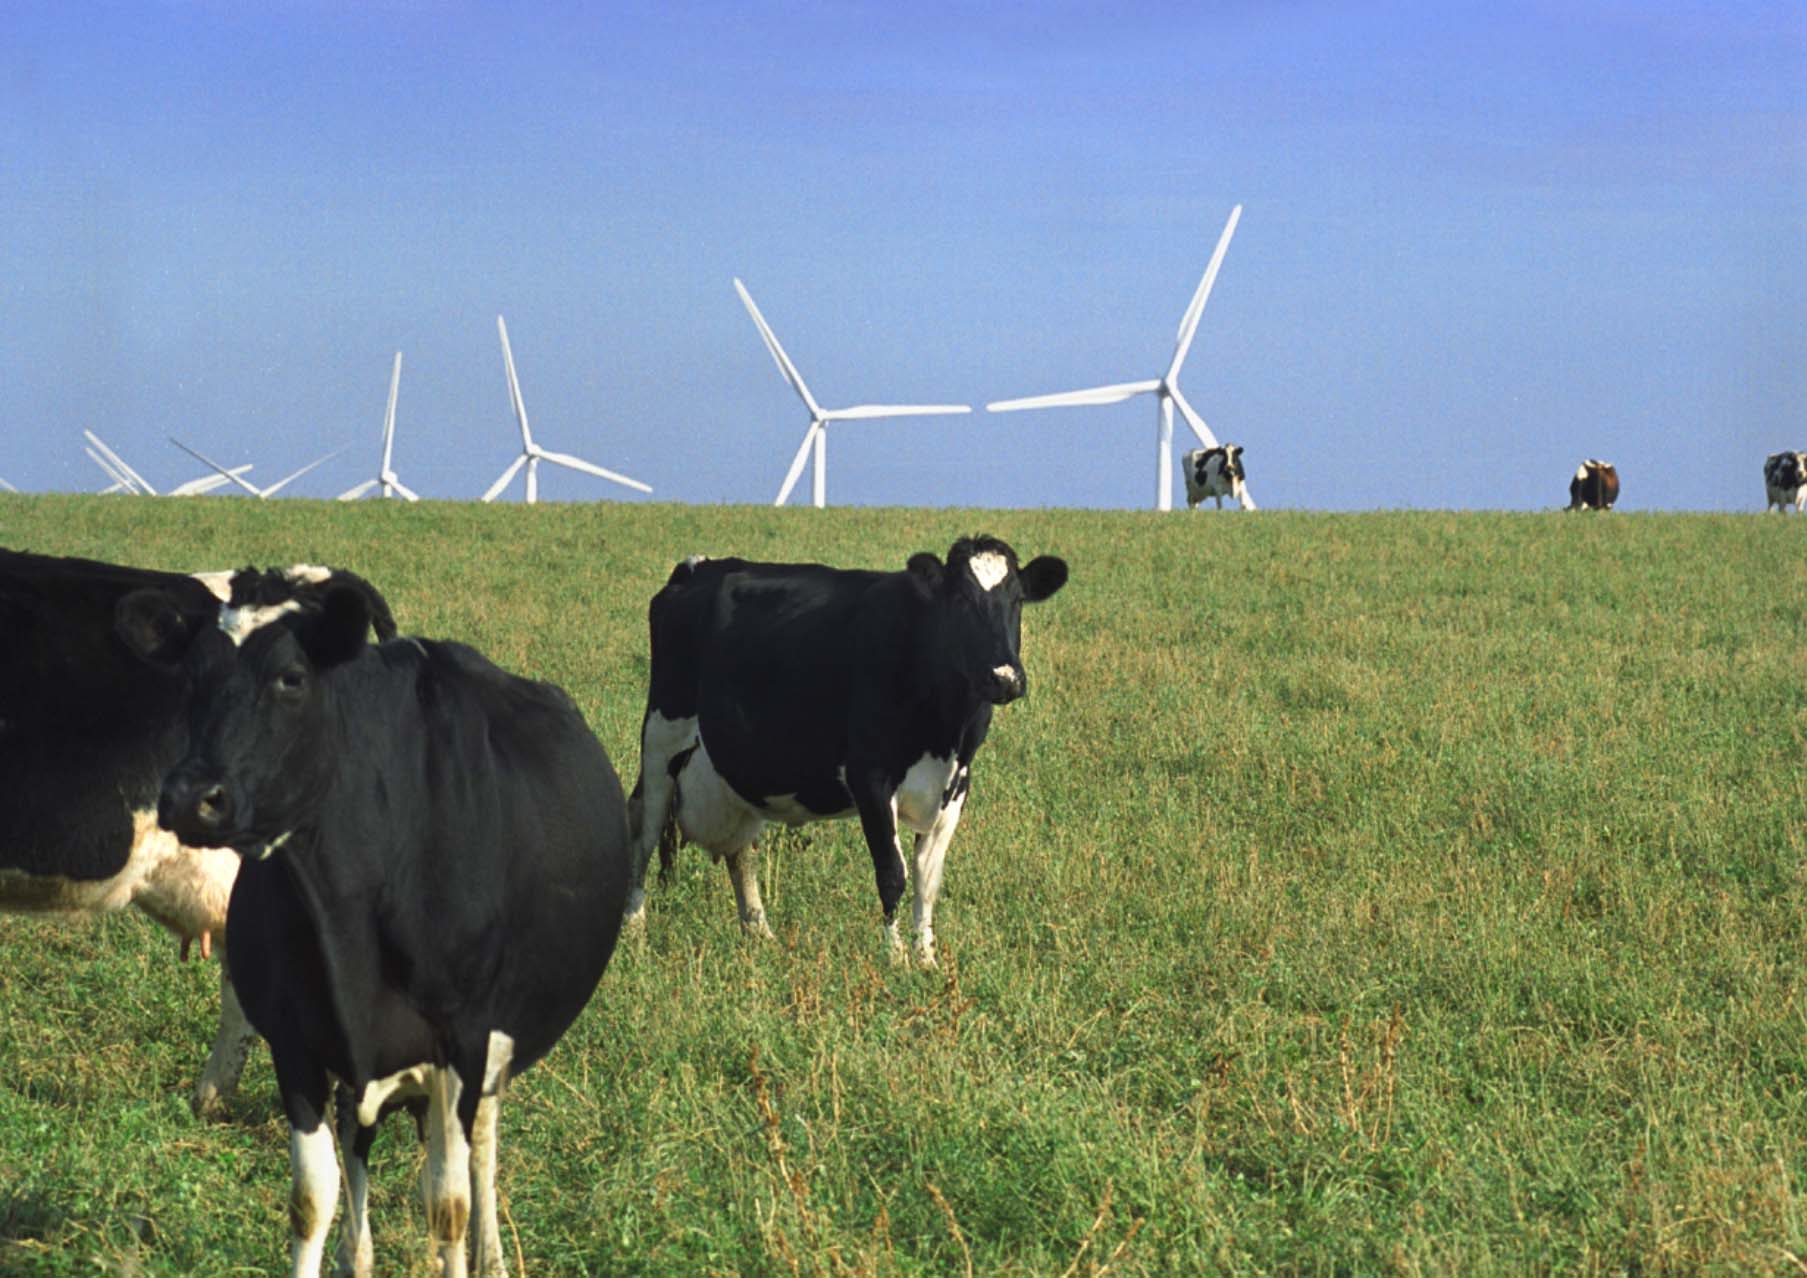 Cows graze in a grassy field with energy-generating windmills in the background